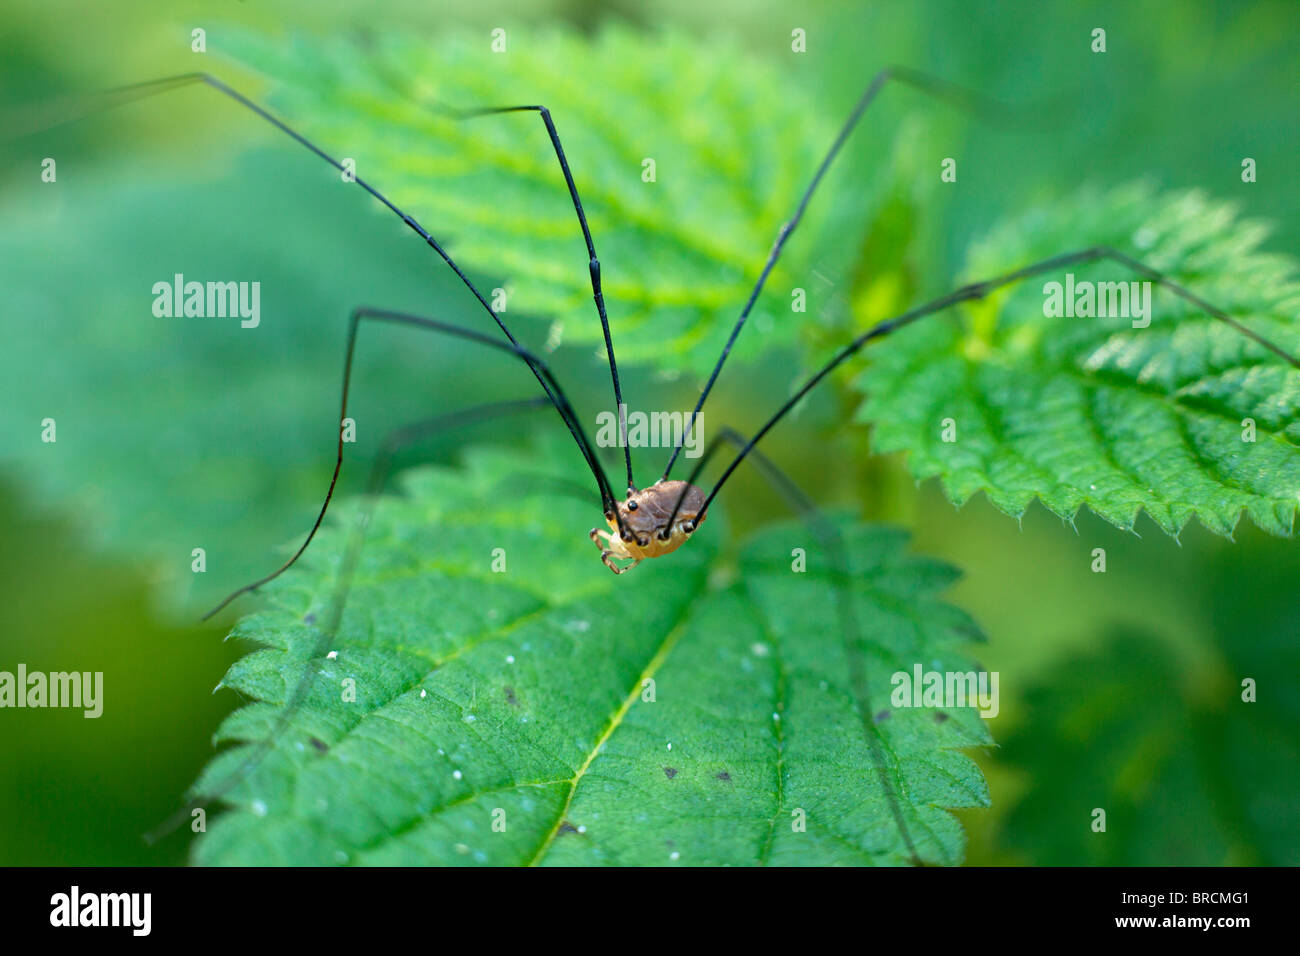 Daddy long legs Spider (Pholcus phalangioides) sitting on a stinging nettle Stock Photo